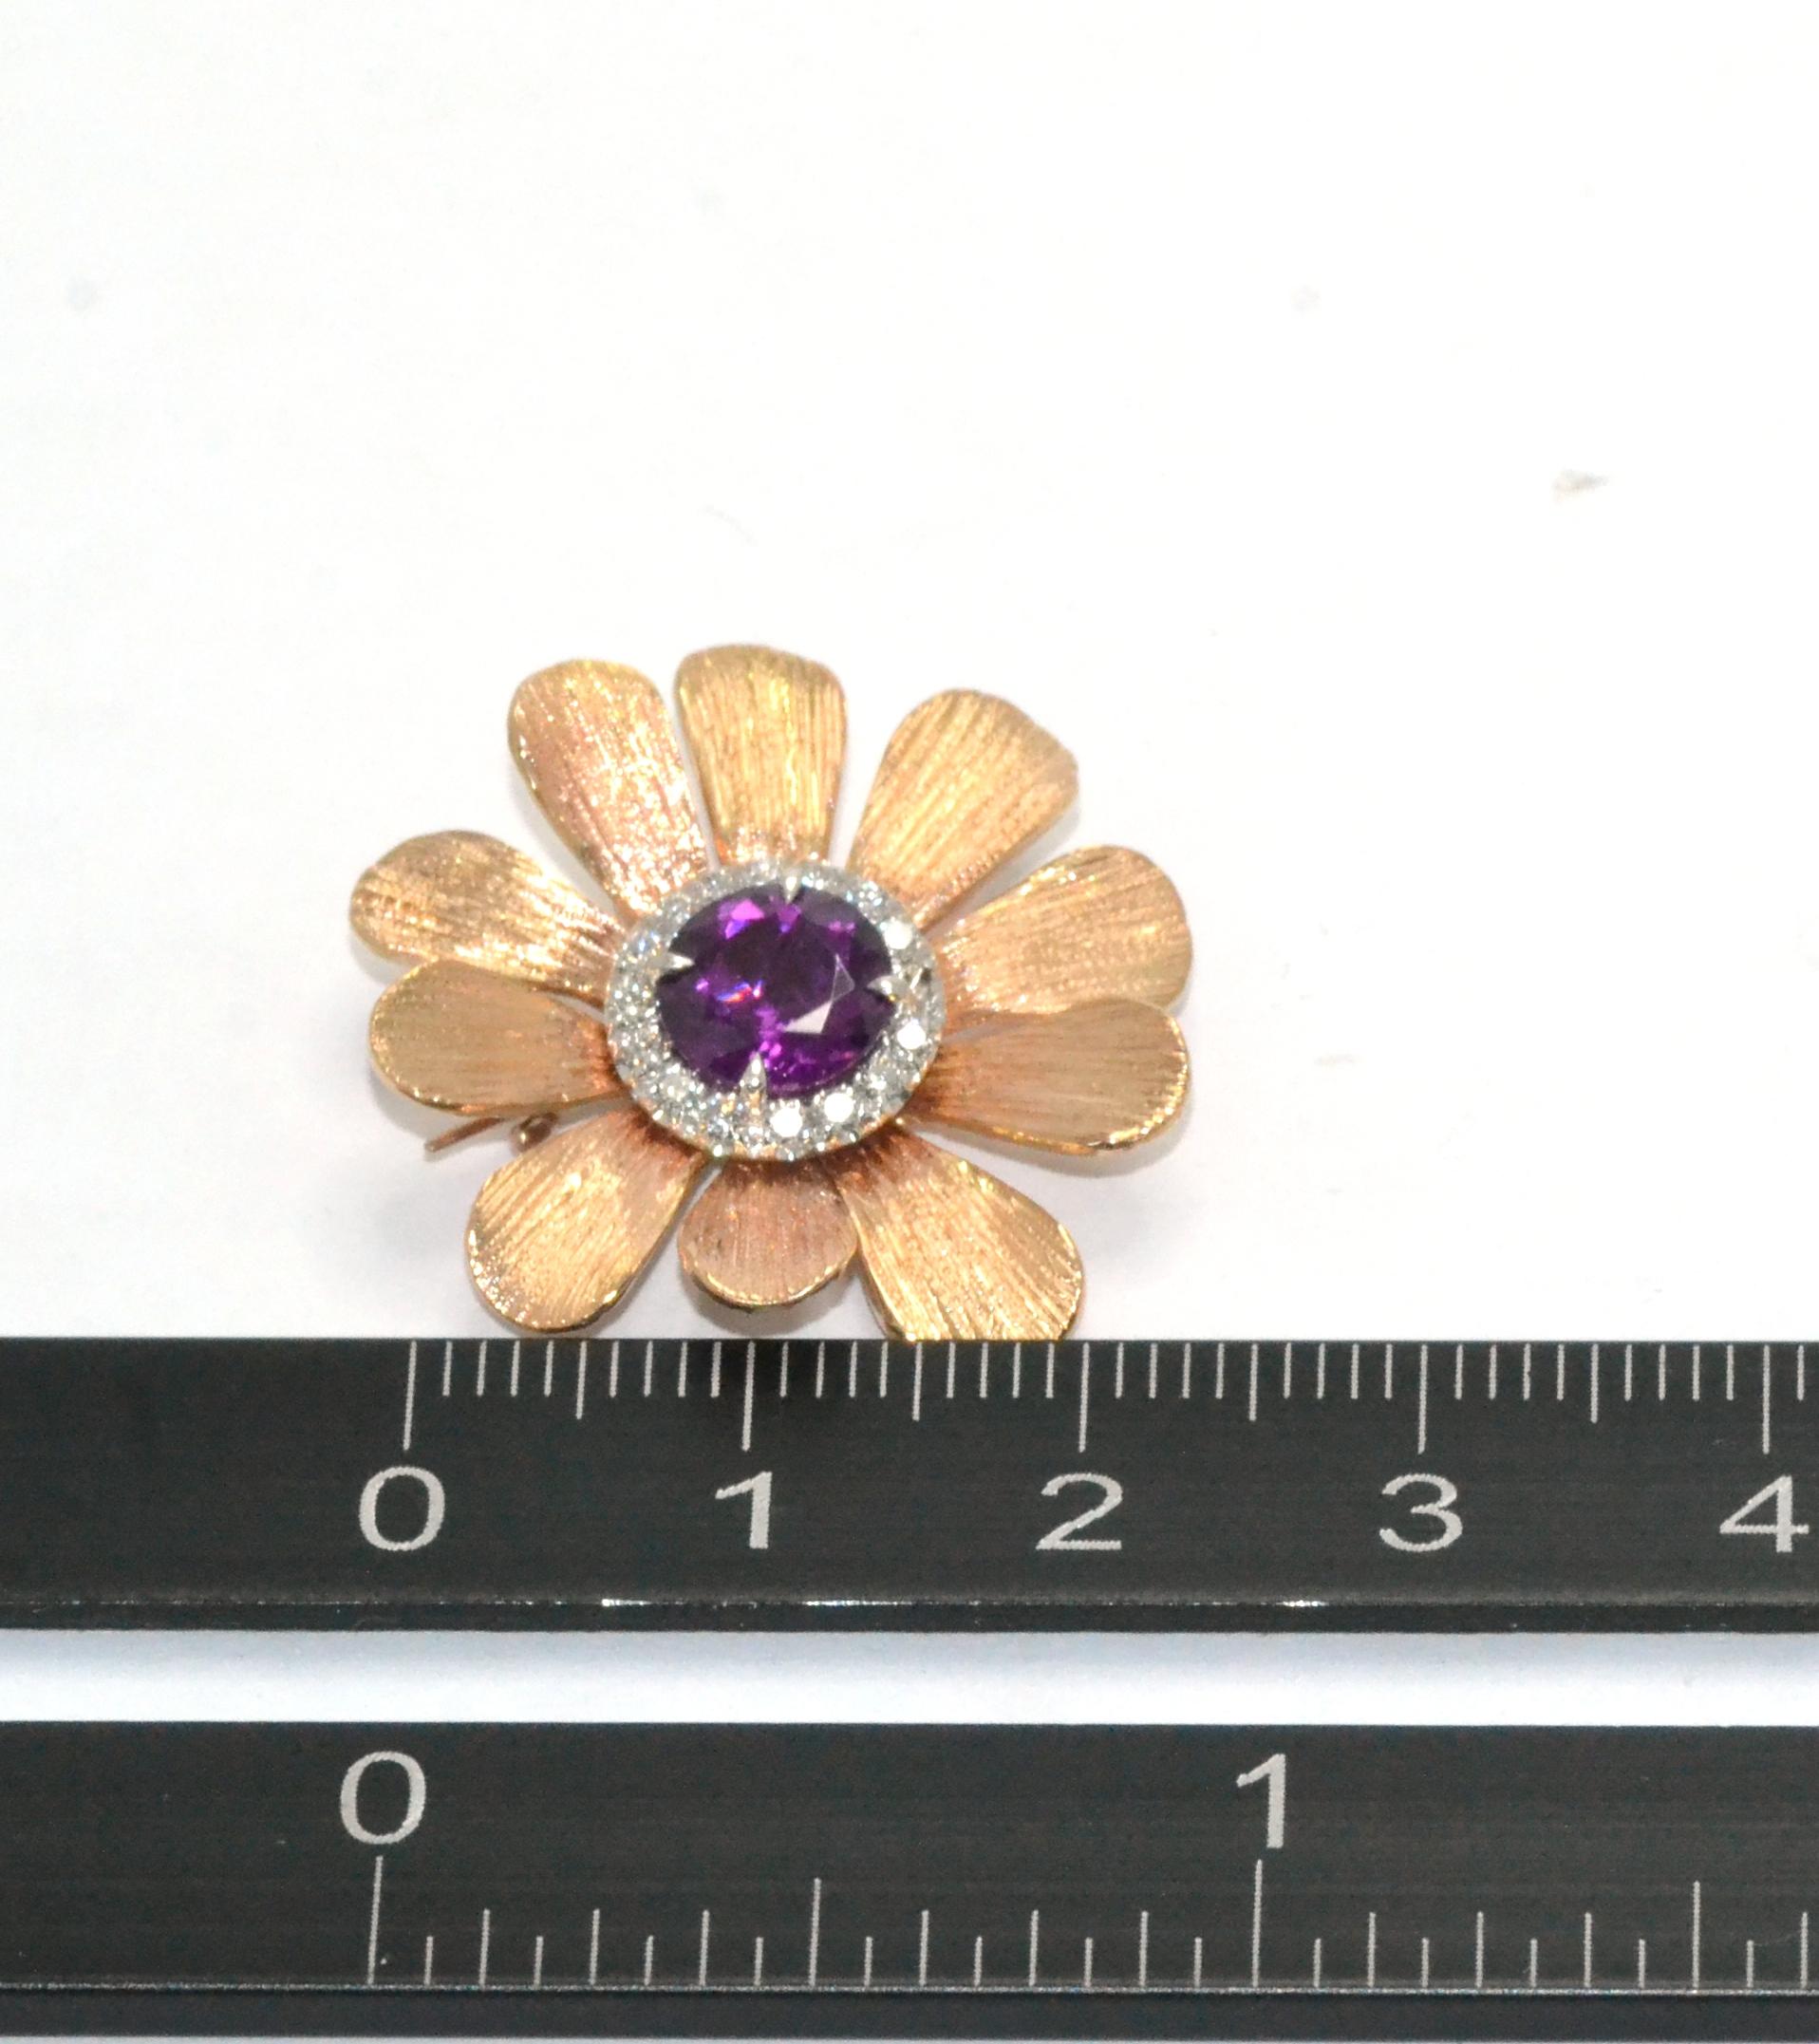 The Happy Flower brooch is a versatile jewel that had been handcrafted in Margherita Burgener family workshop, Italy.
Beautifully engraved by burin, each petal looks like real flower.
Pink gold matches perfectly the purple of the central stone, a